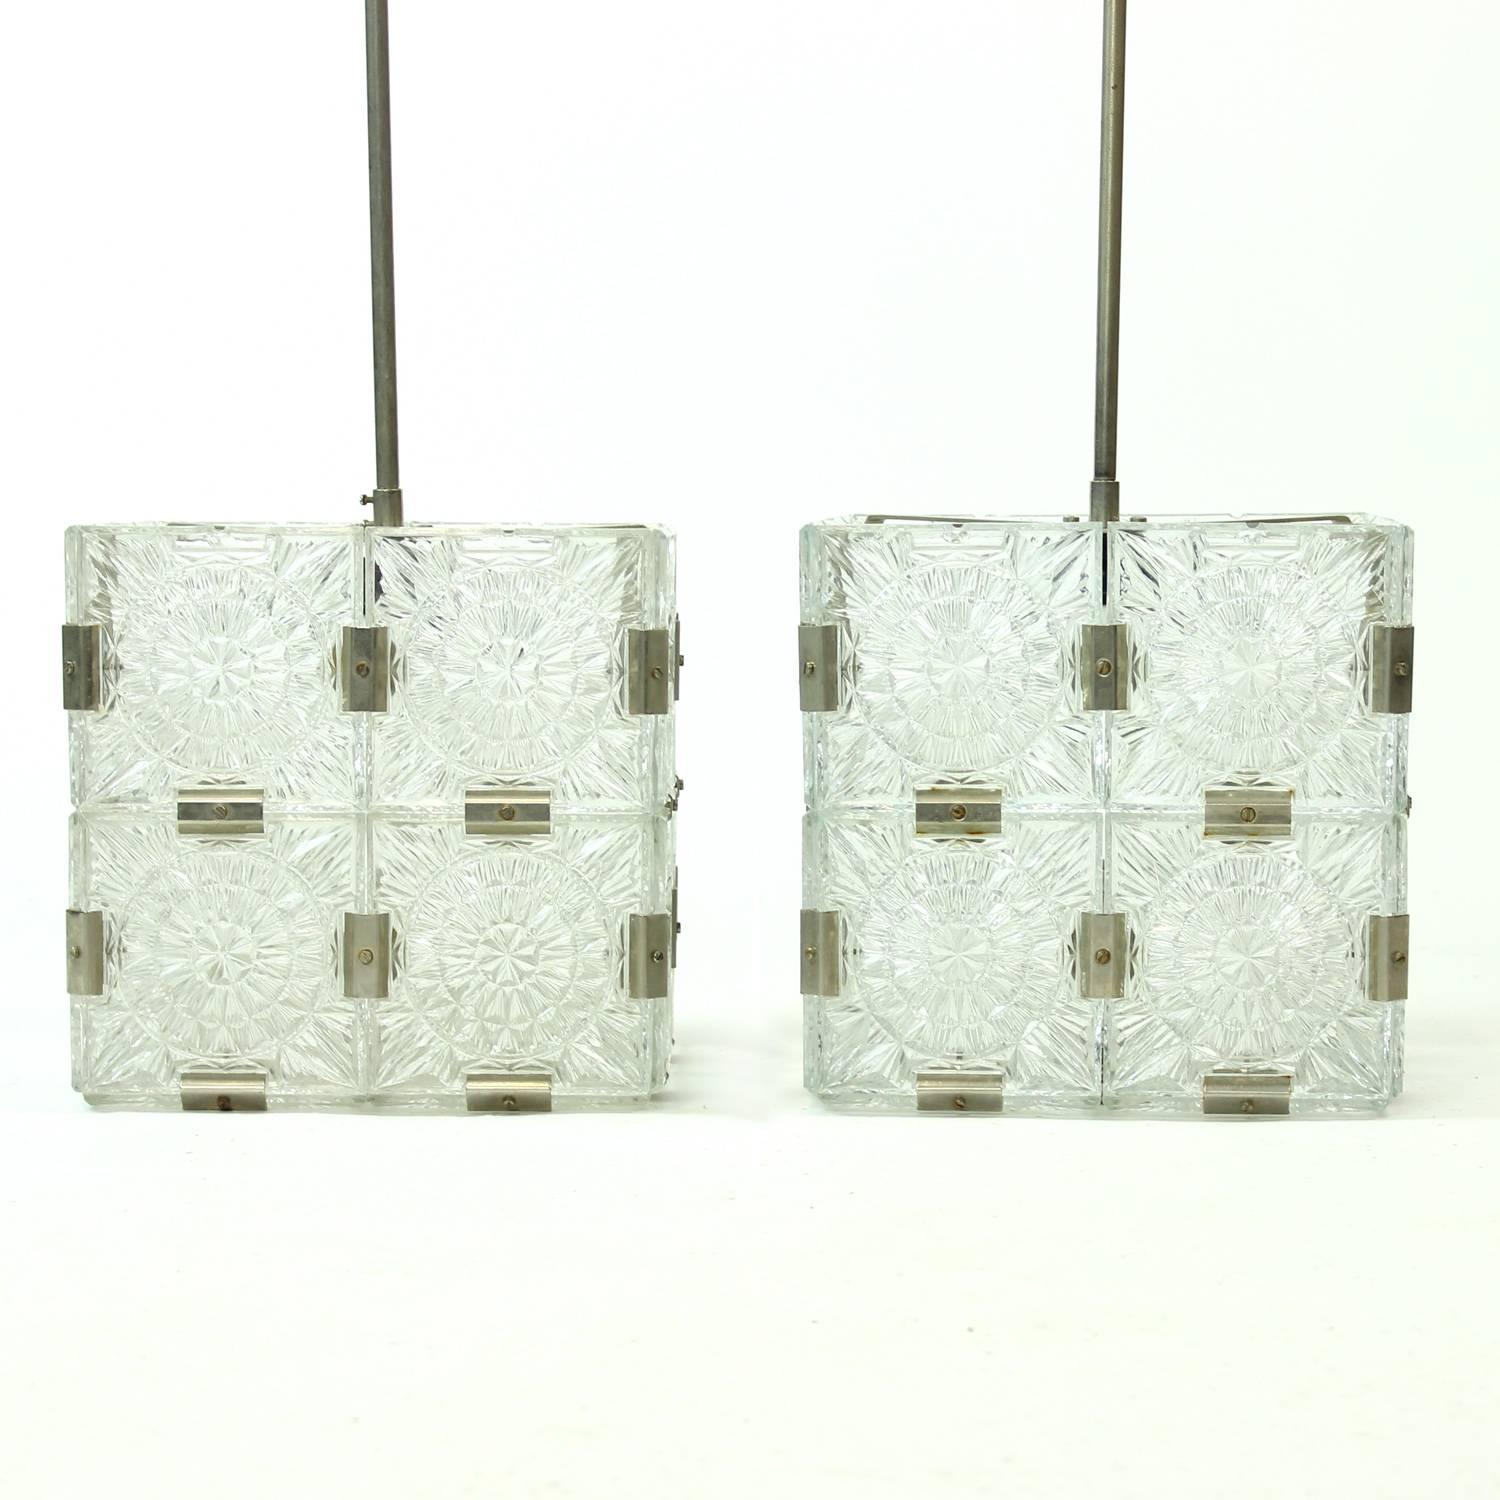 These are two beautiful glass pendants produced by Kamenický Šenov in 1970s. The light is hanging on a chrome metal construction. The light is made of square glass panels combined to make a glass cube. Beautiful design and light. Each panel is made